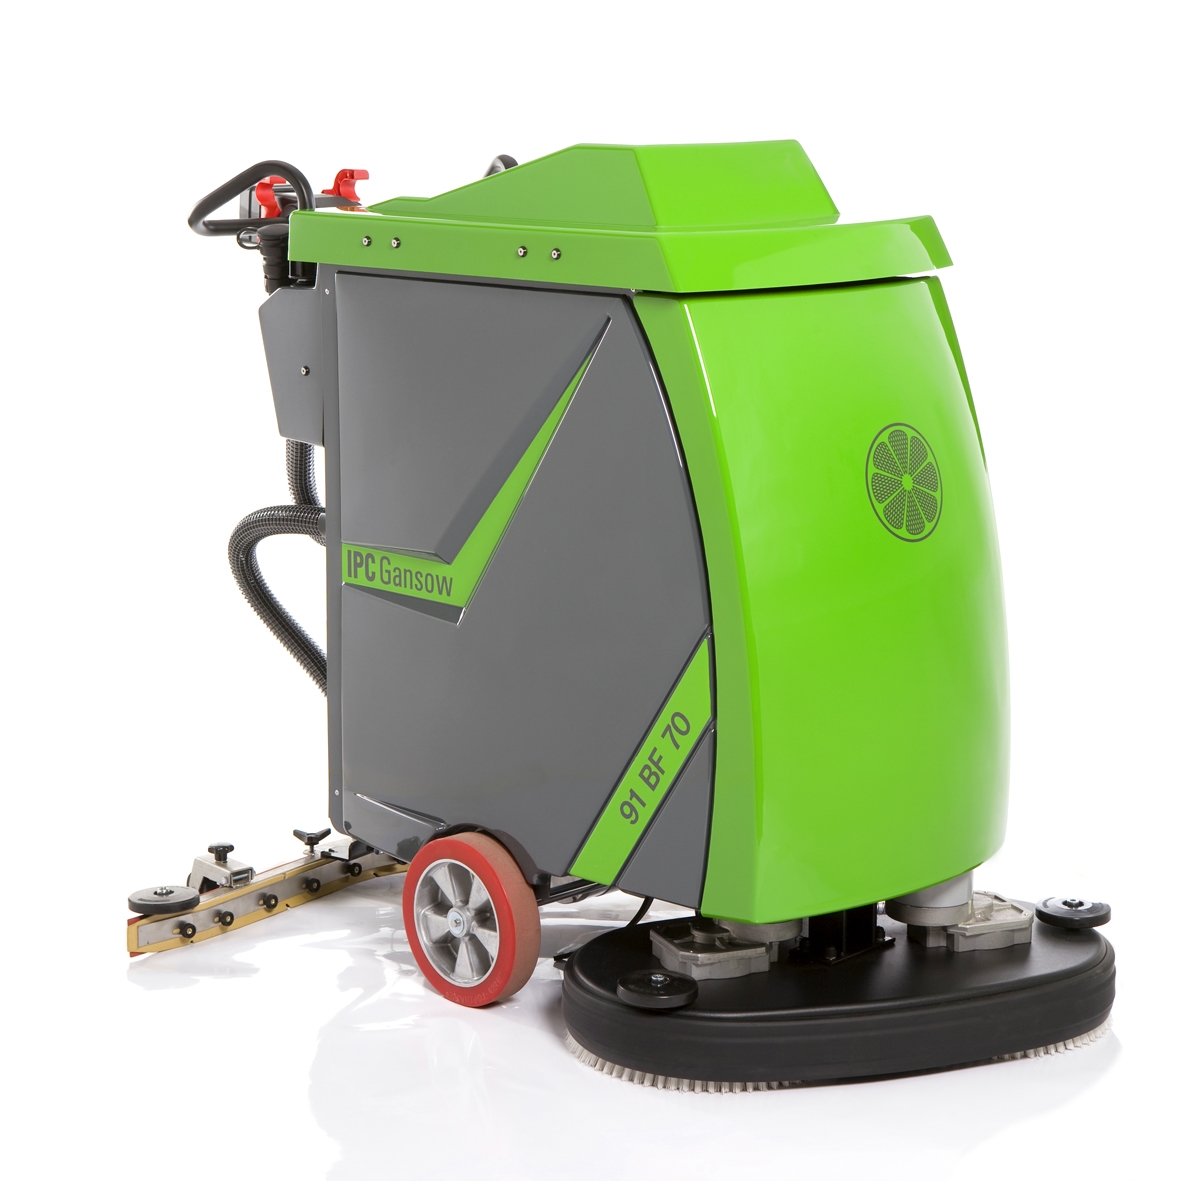 Alpha FME Introducing the IPC Gansow Premium 91 BF 85 Scrubber Drier